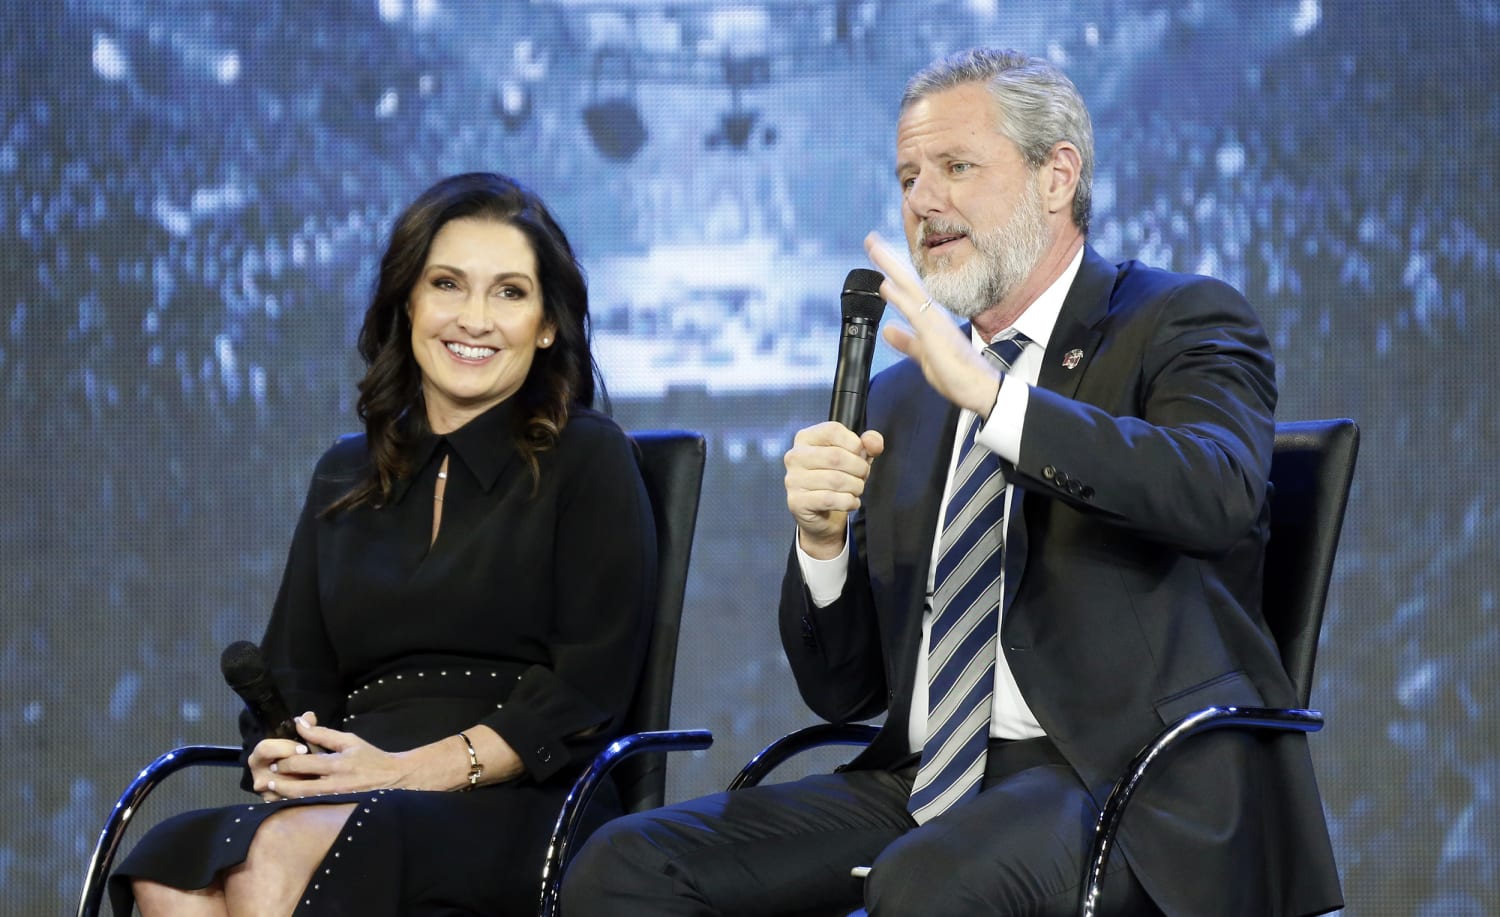 The Falwell affair shows non-monogamy isnt rare — but it does challenge social norms